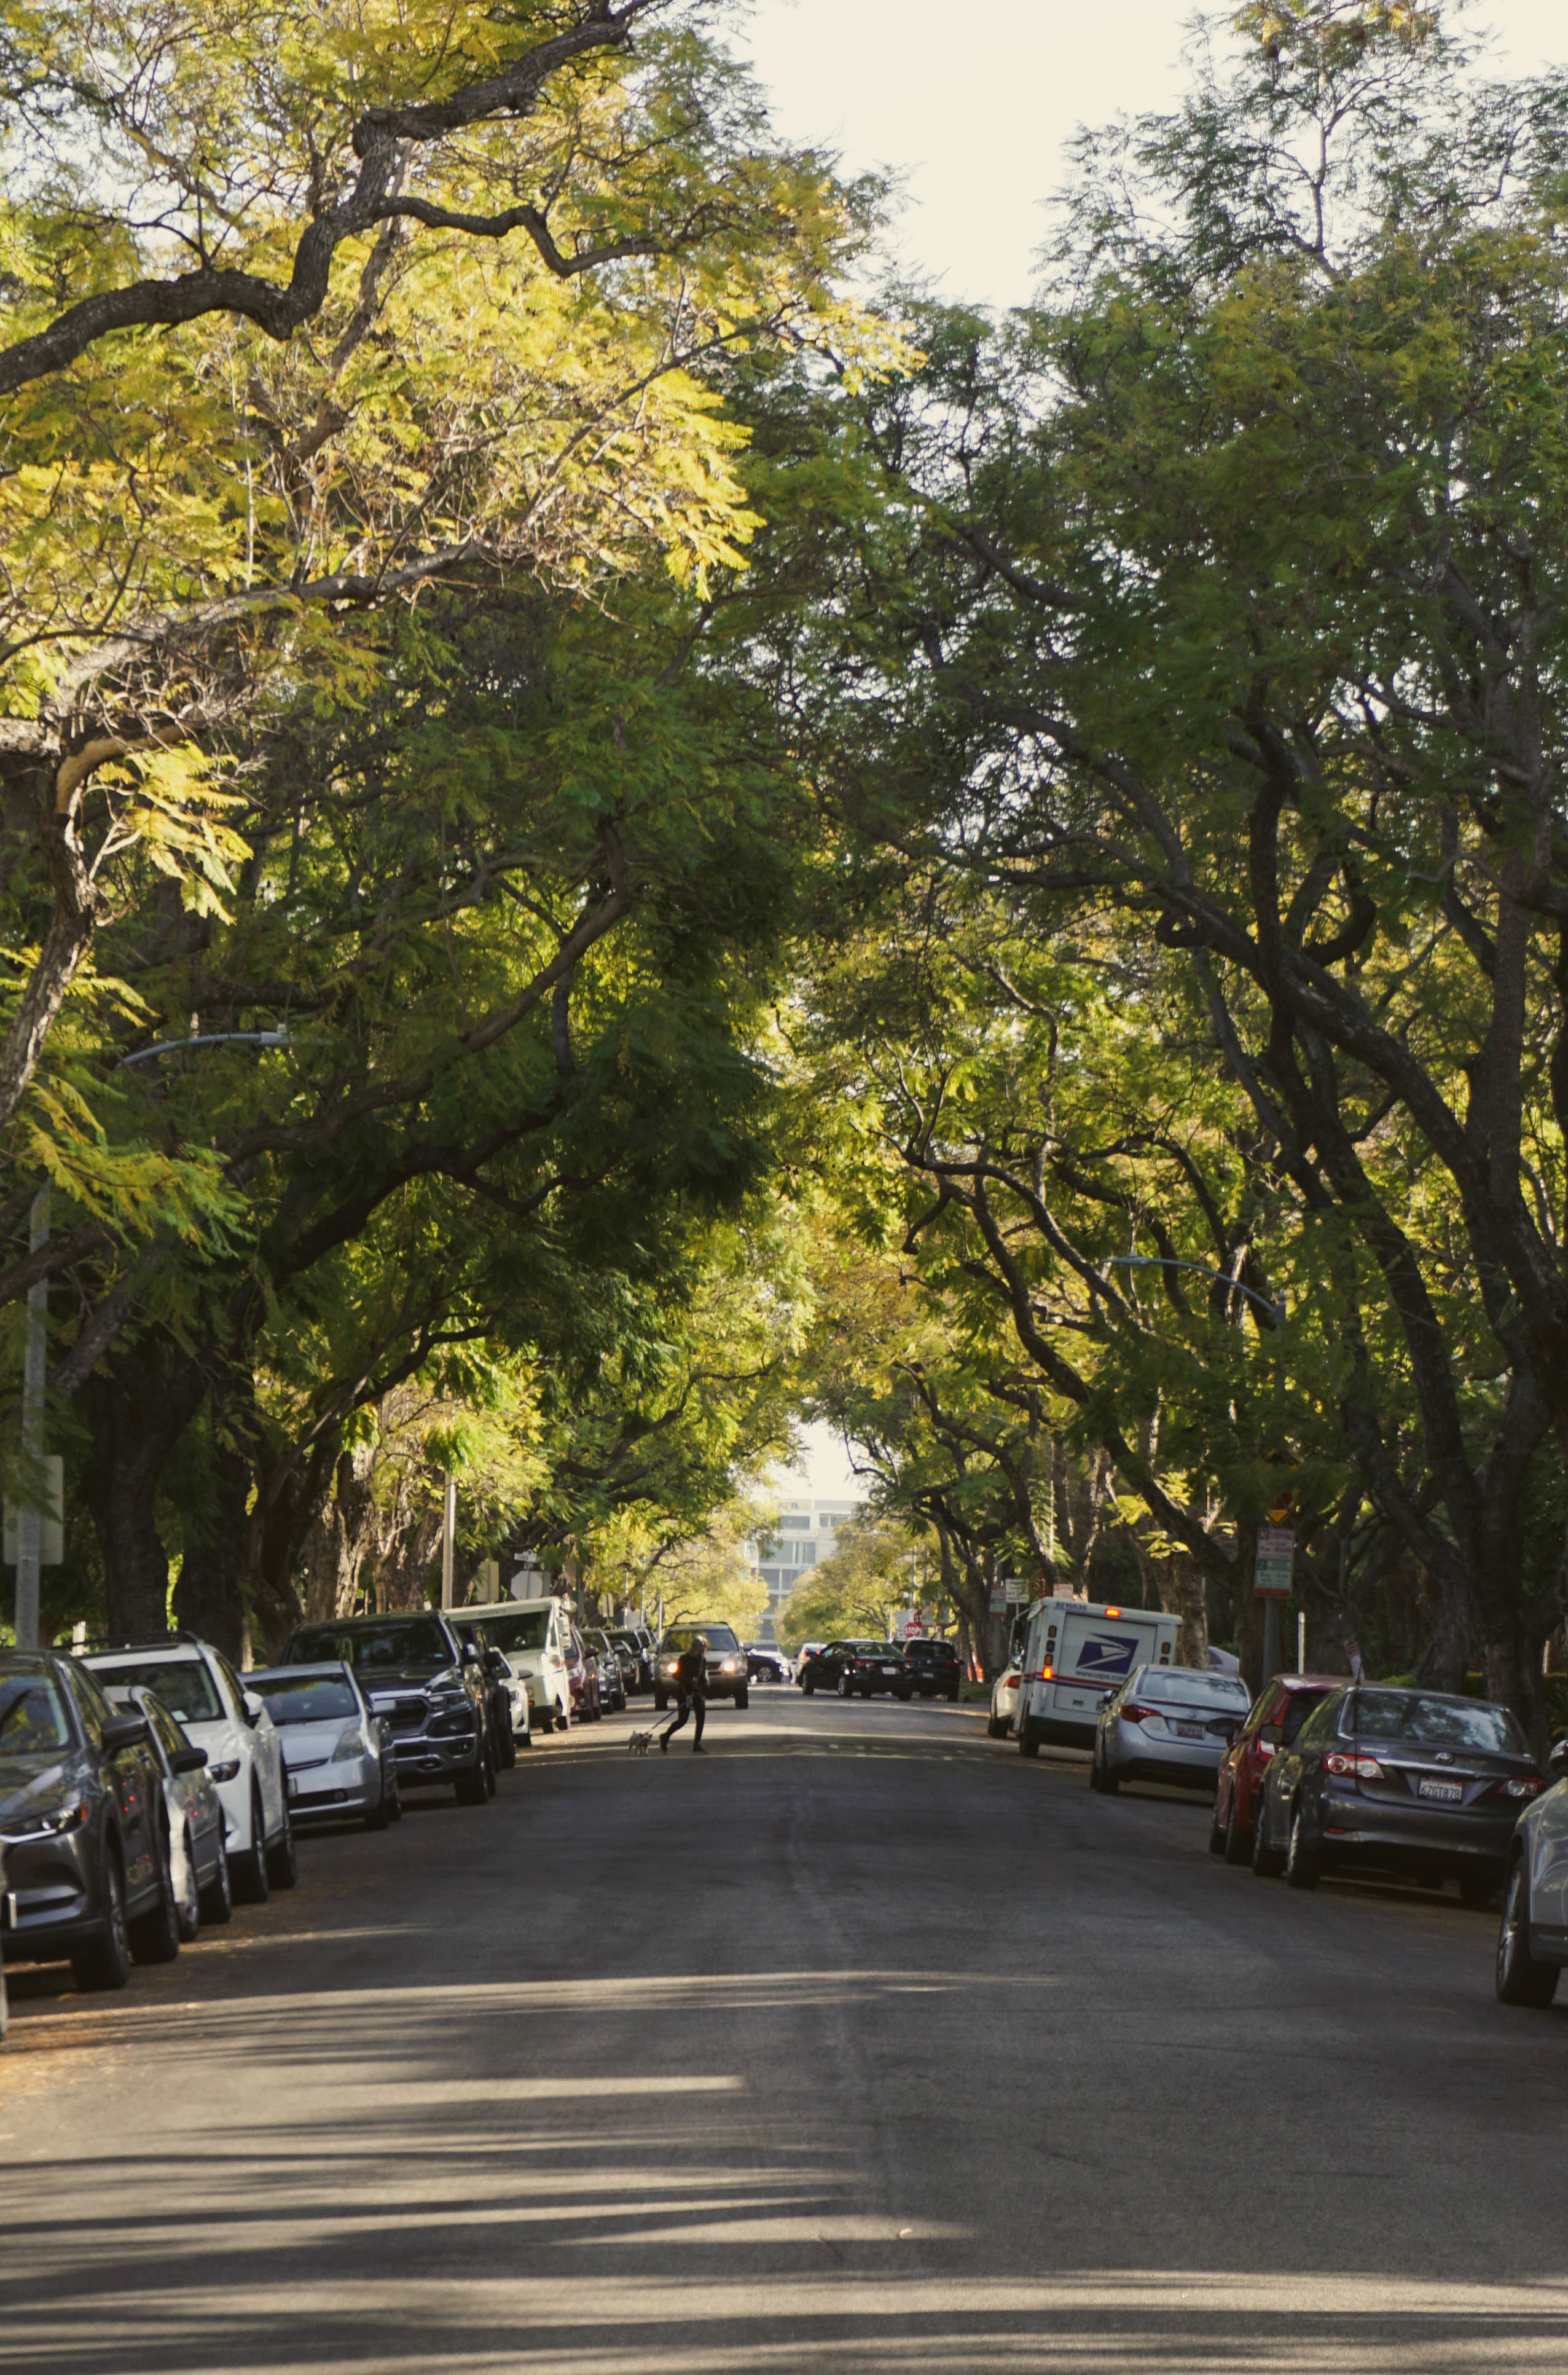 Jacaranda trees forming a canopy and tree tunnel over a residential street